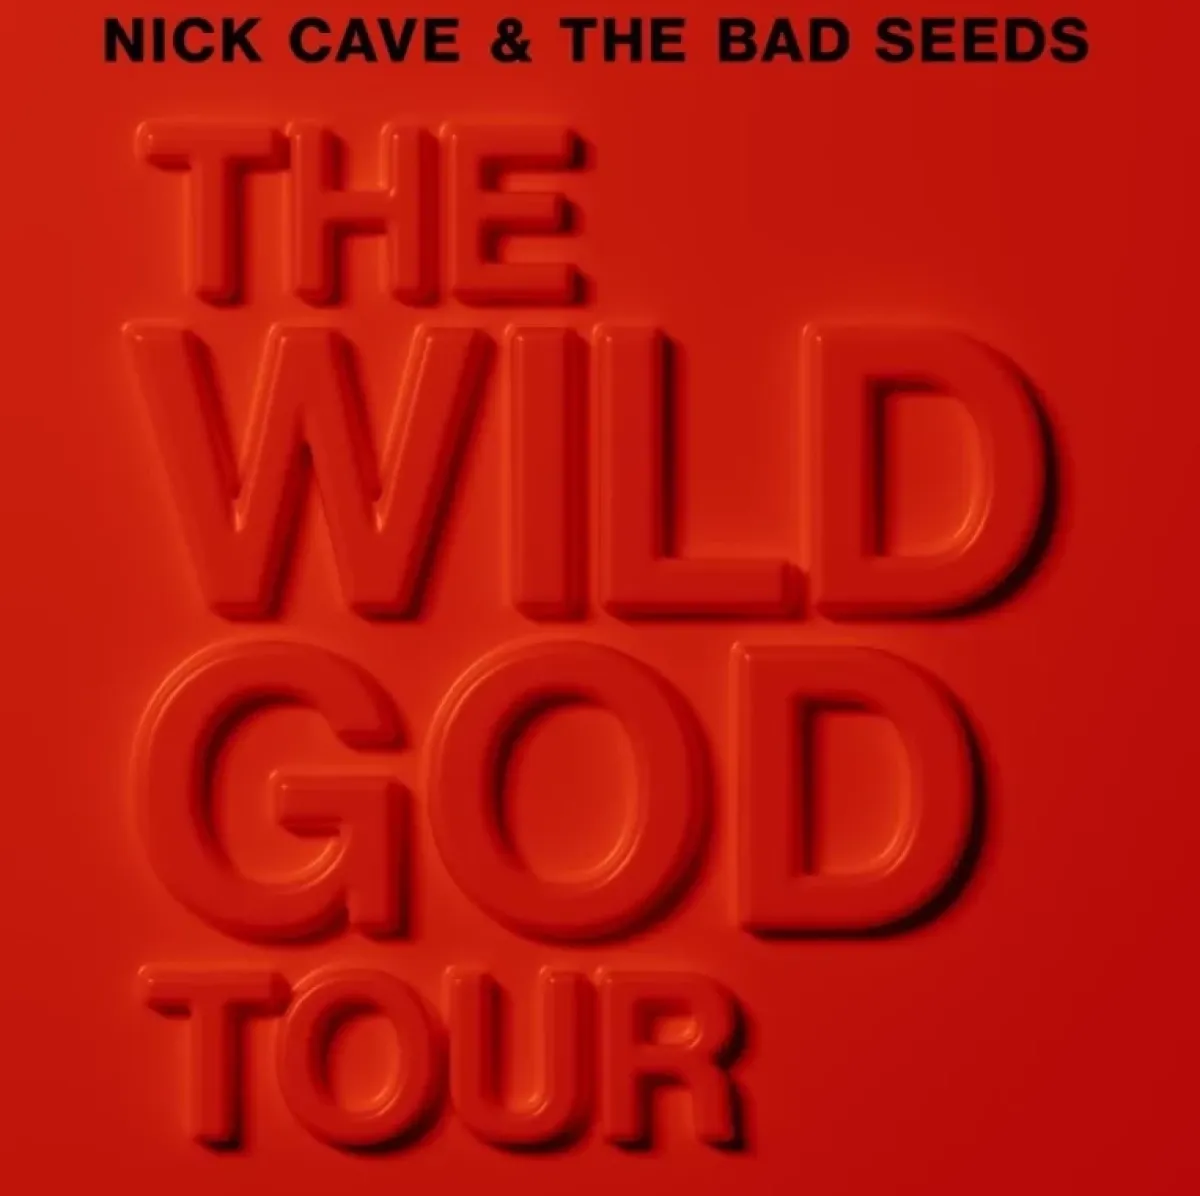 Nick Cave And The Bad Seeds at 3Arena Dublin Tickets